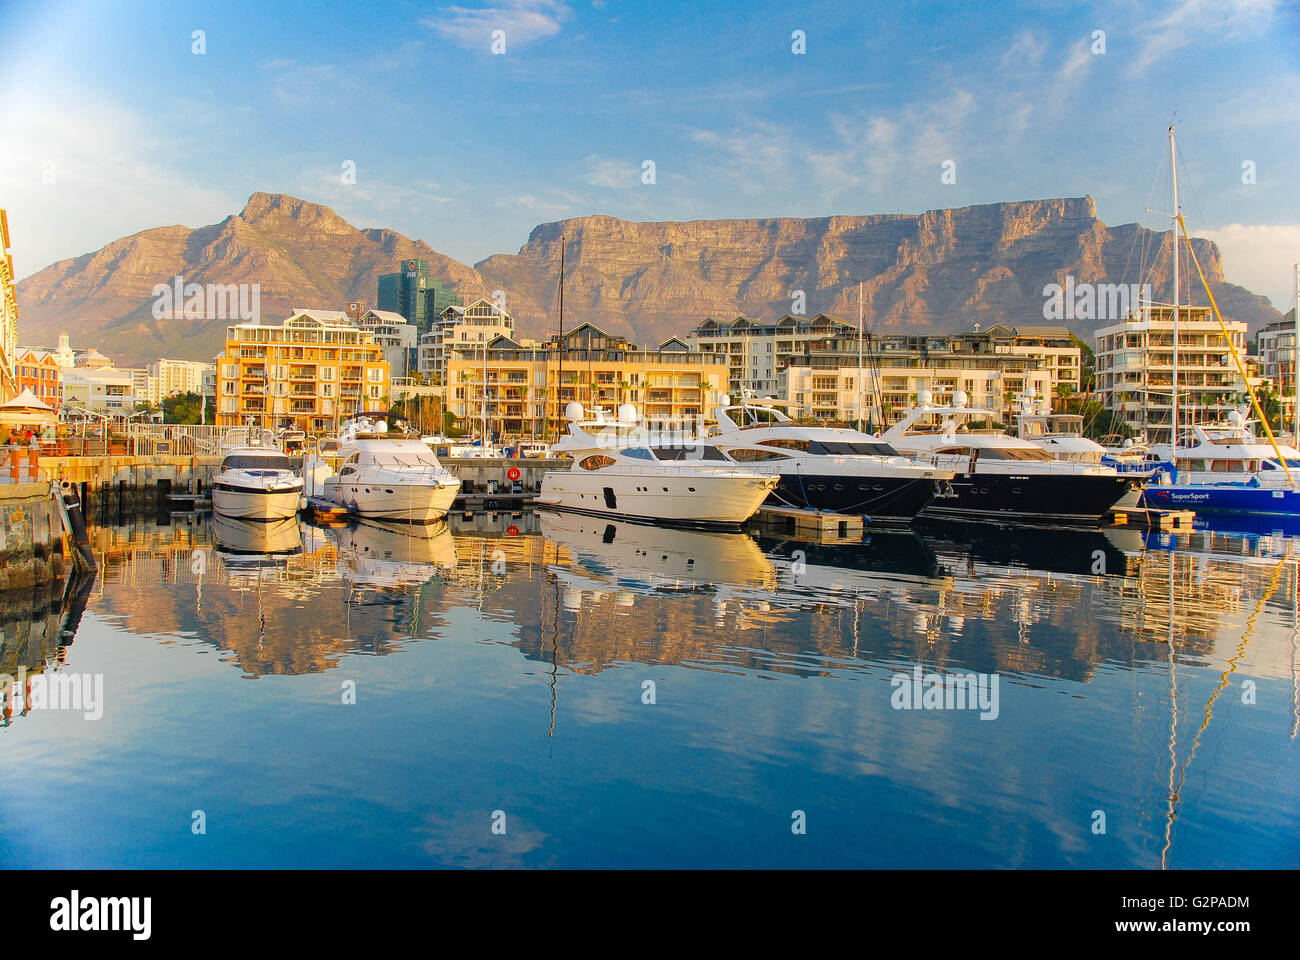 V&A Waterfront in Cape Town with the backdrop of the Table Mountain, South Africa Stock Photo